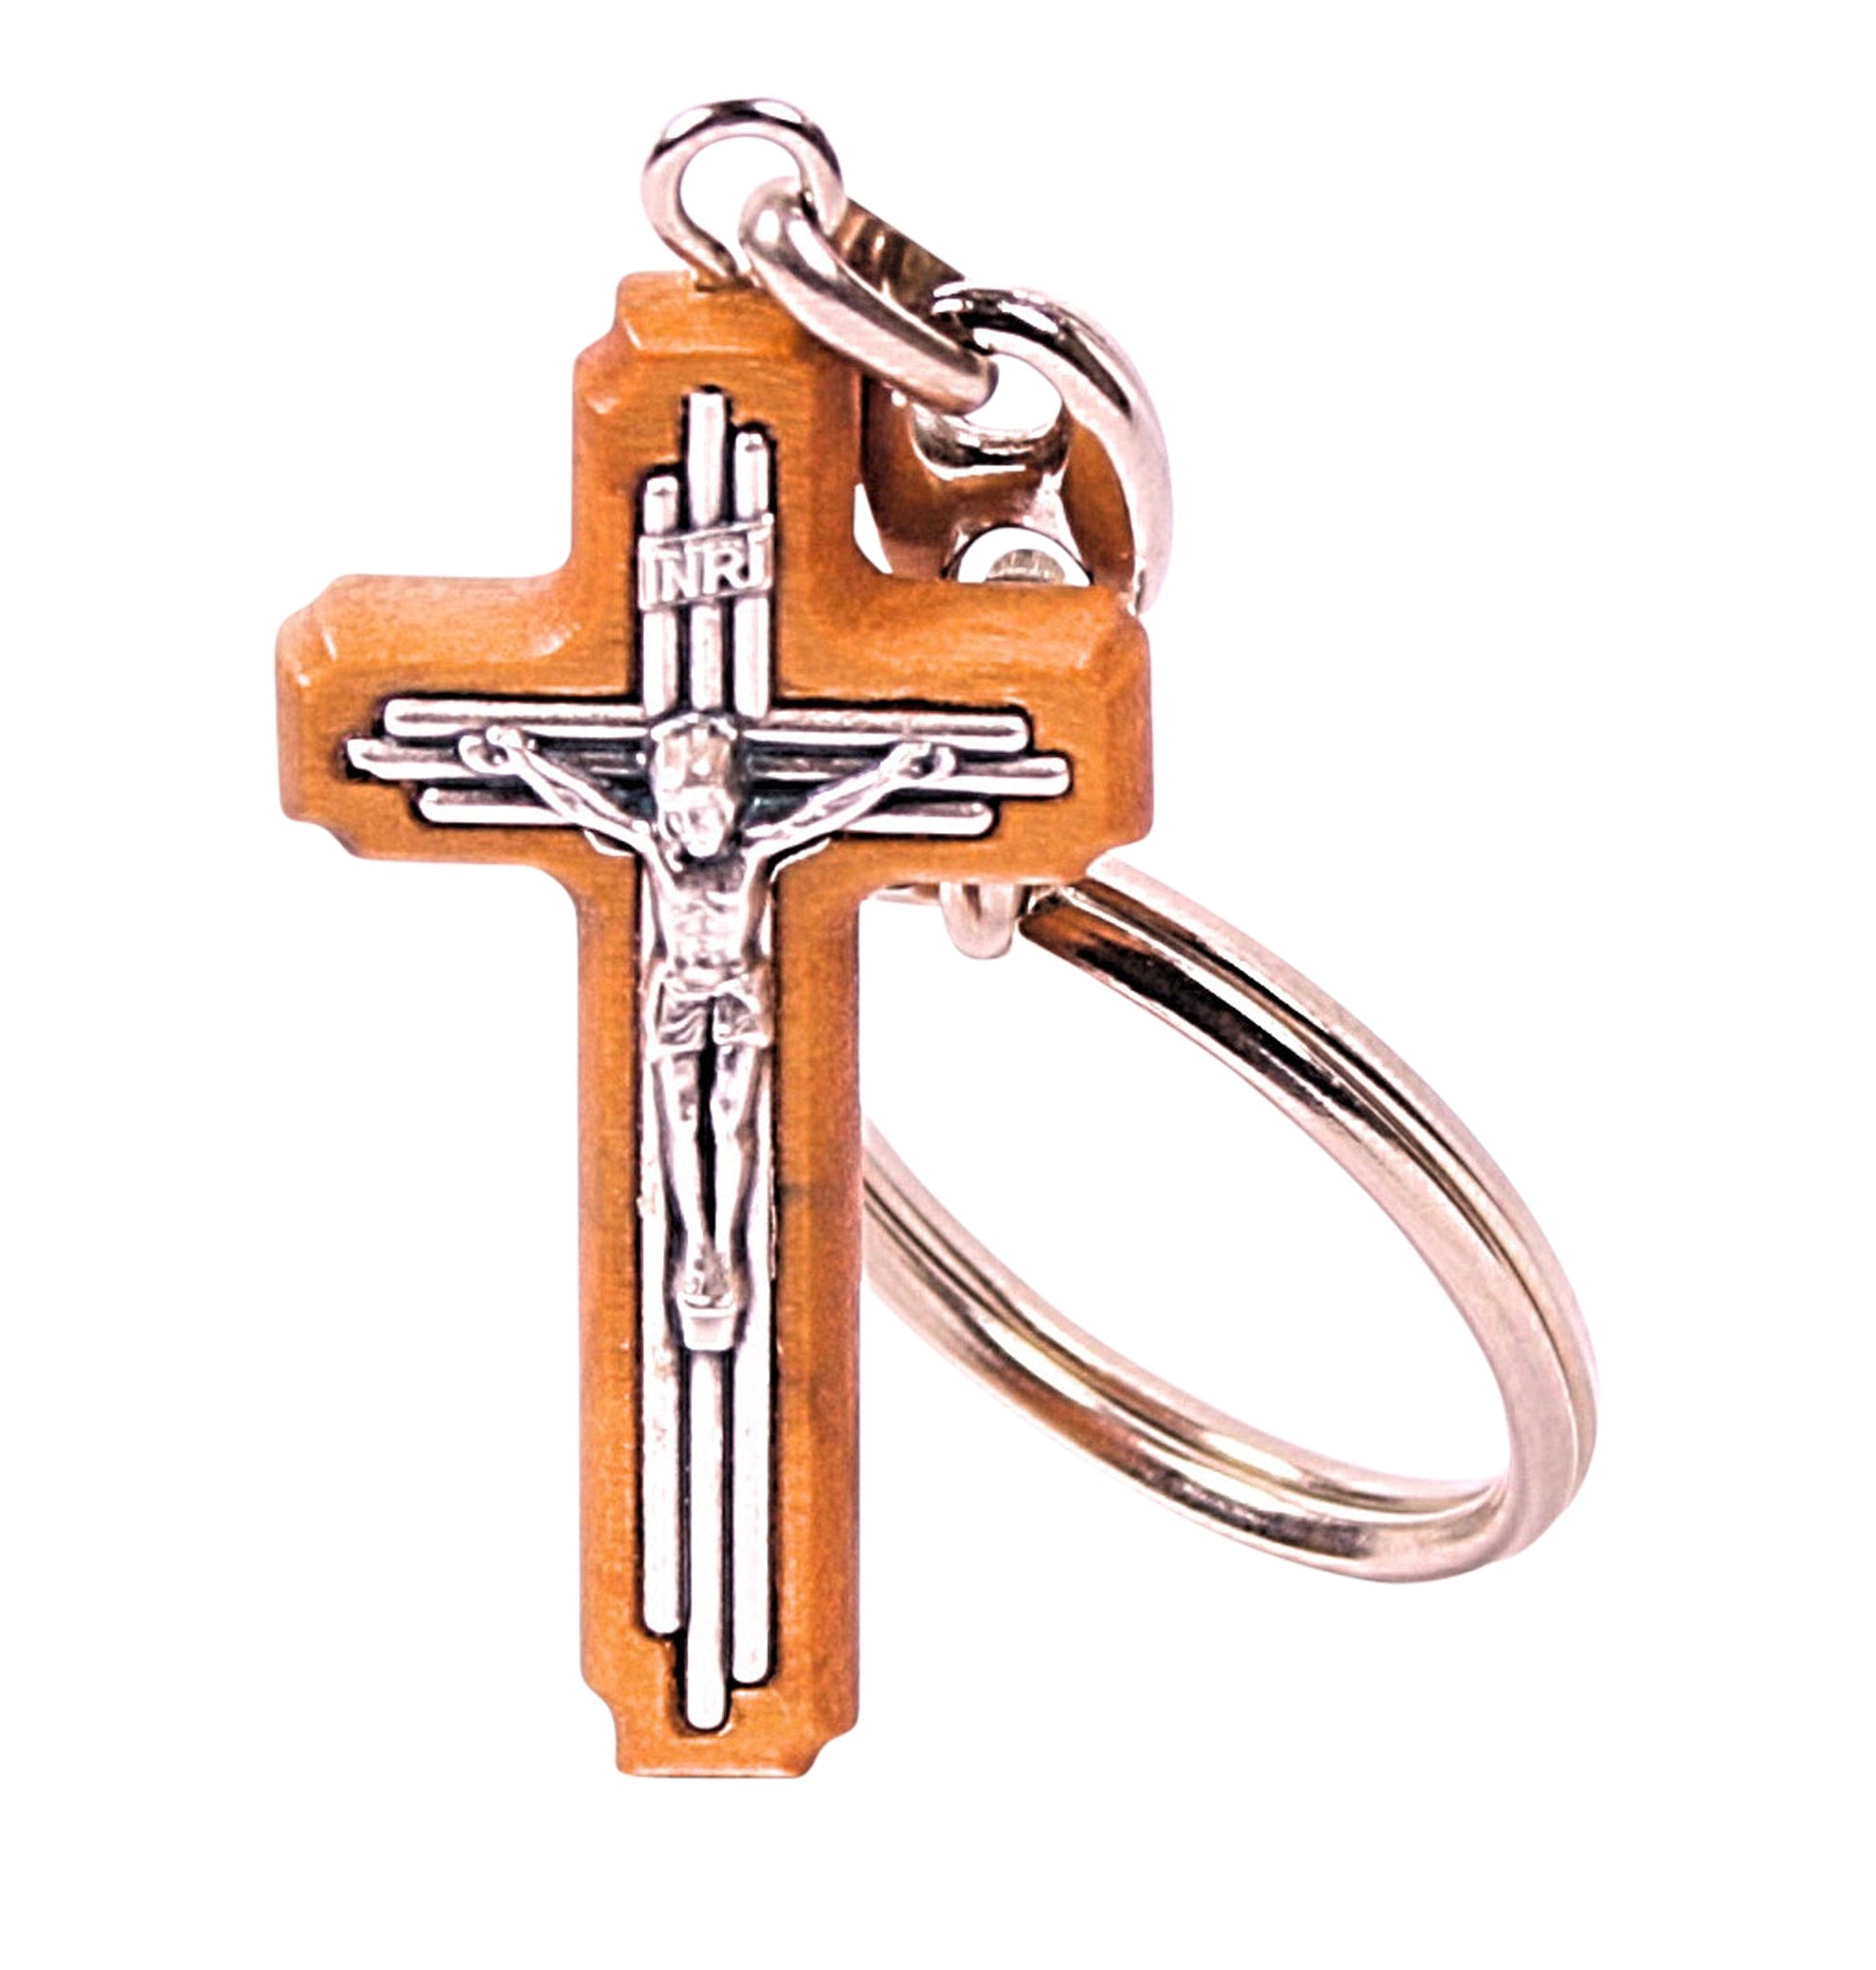 Olive wood crucifix pendant keychain with a detailed silver-tone metal inlay forming a unique three-lined cross design, with the figure of Jesus at the center.